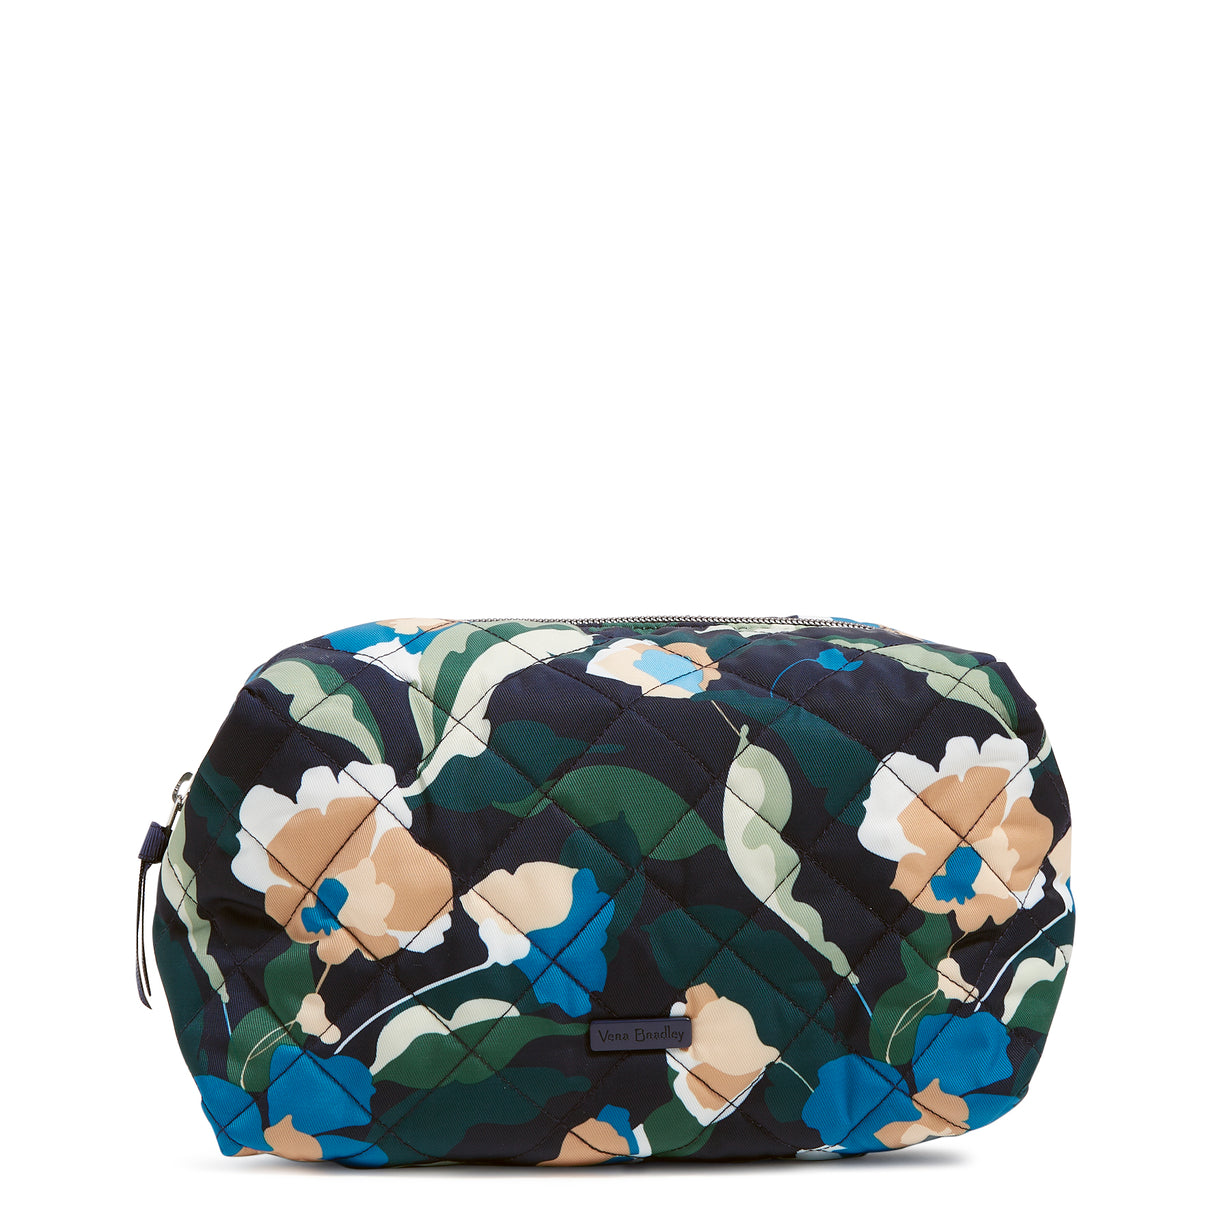 A Large Cosmetic Bag from Vera Bradley in their new Immersed Blooms.